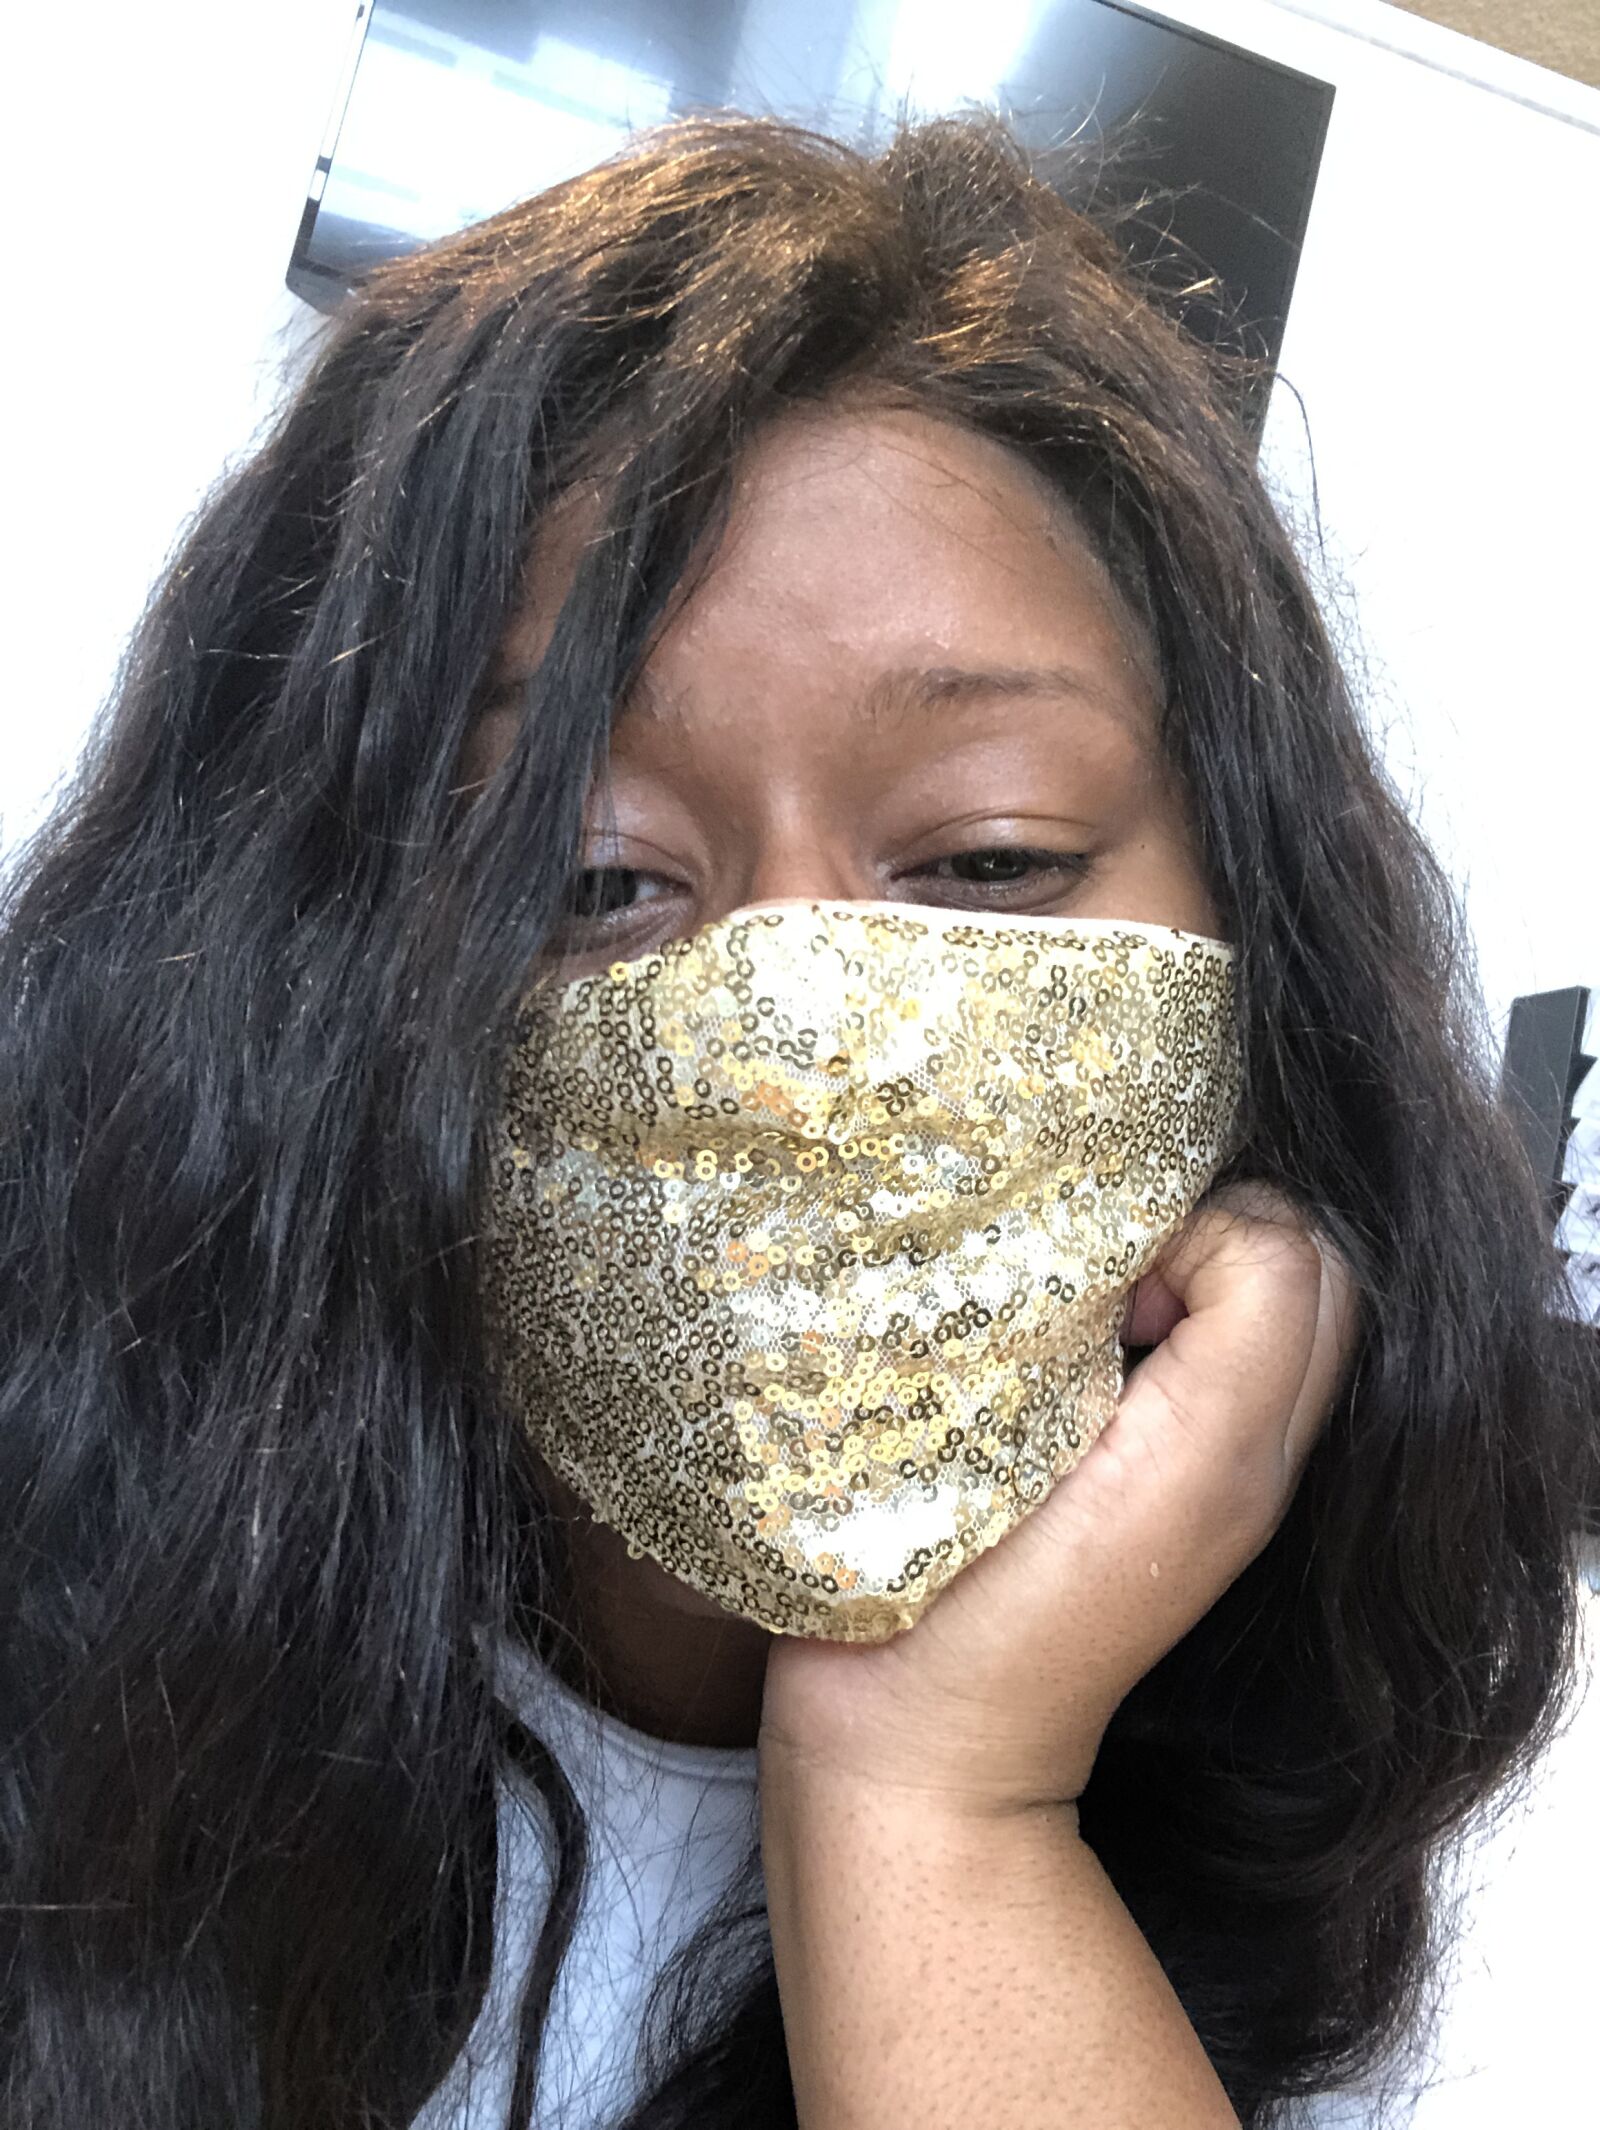 Apple iPhone X sample photo. Woman, mask, gold photography